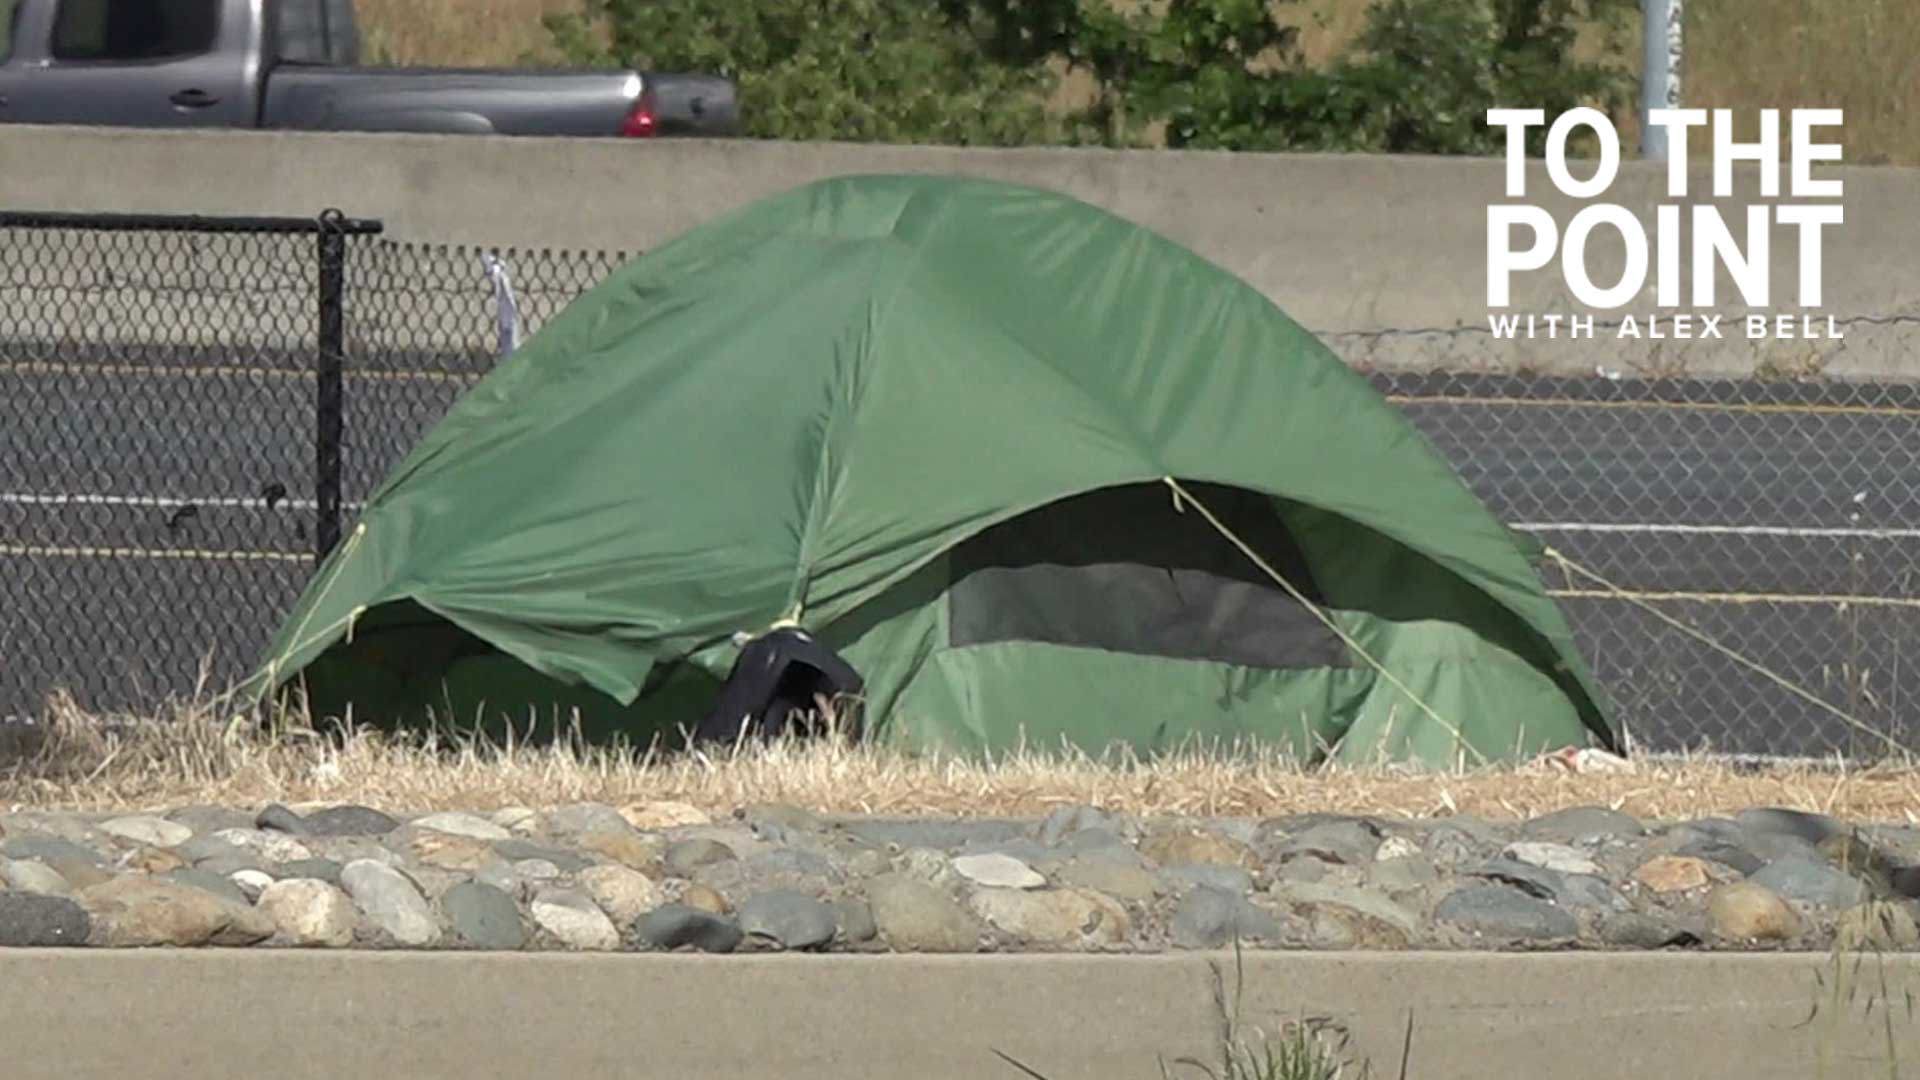 Sacramento business owner frustrated by lack of progress in resolving homeless crisis solutions